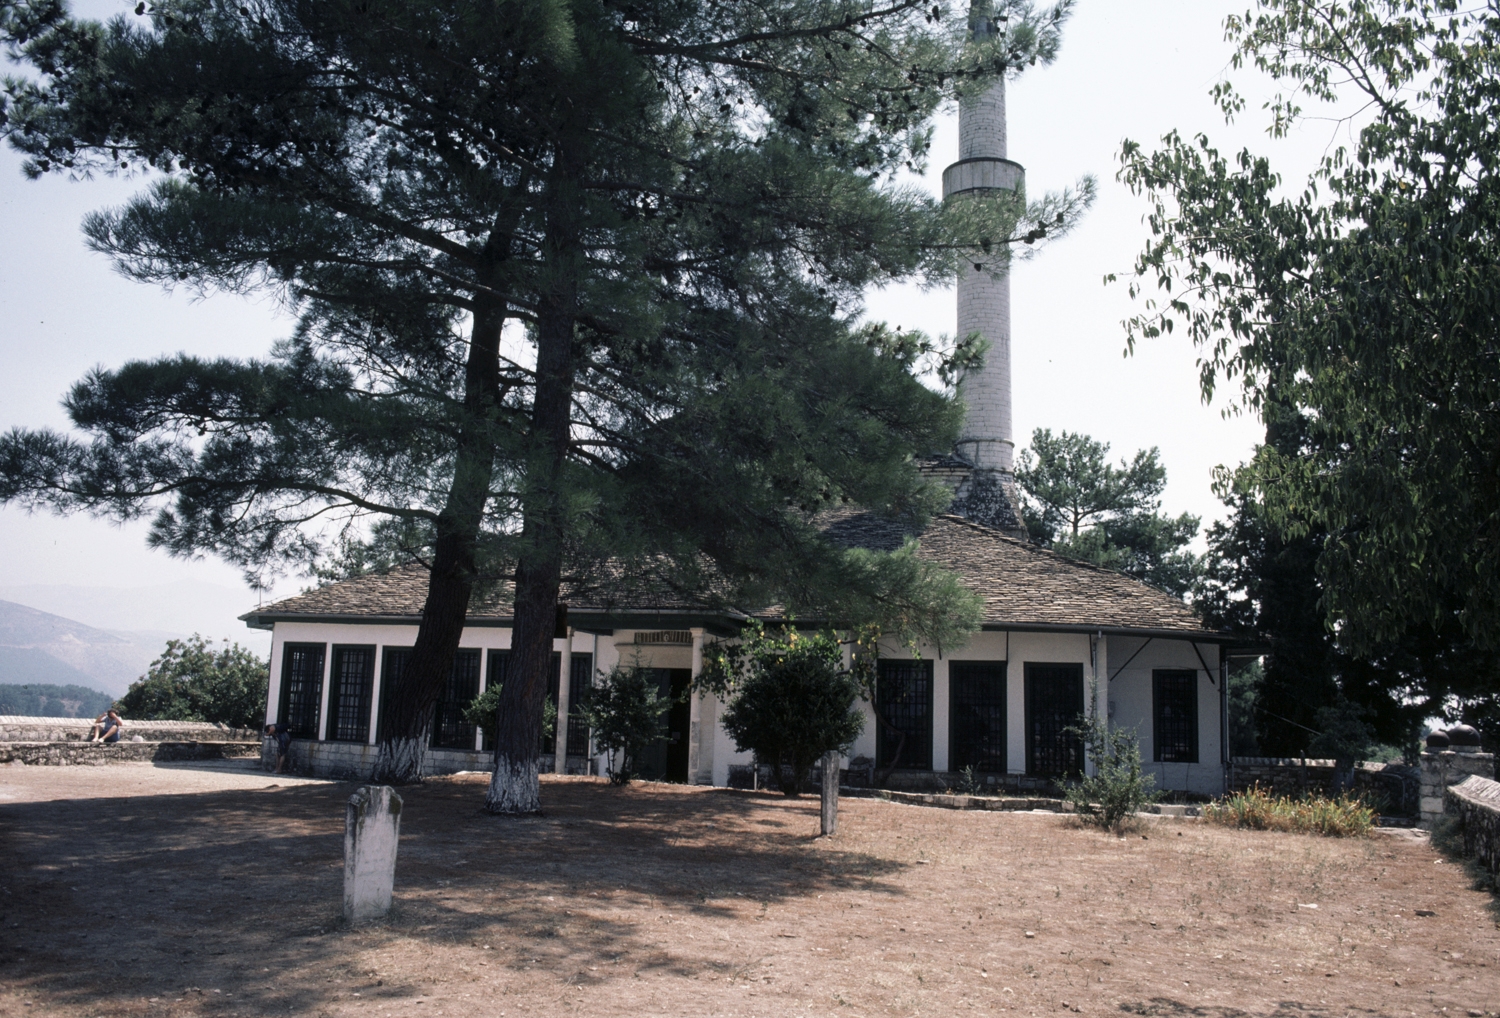 General exterior view of mosque with cemetery in yard